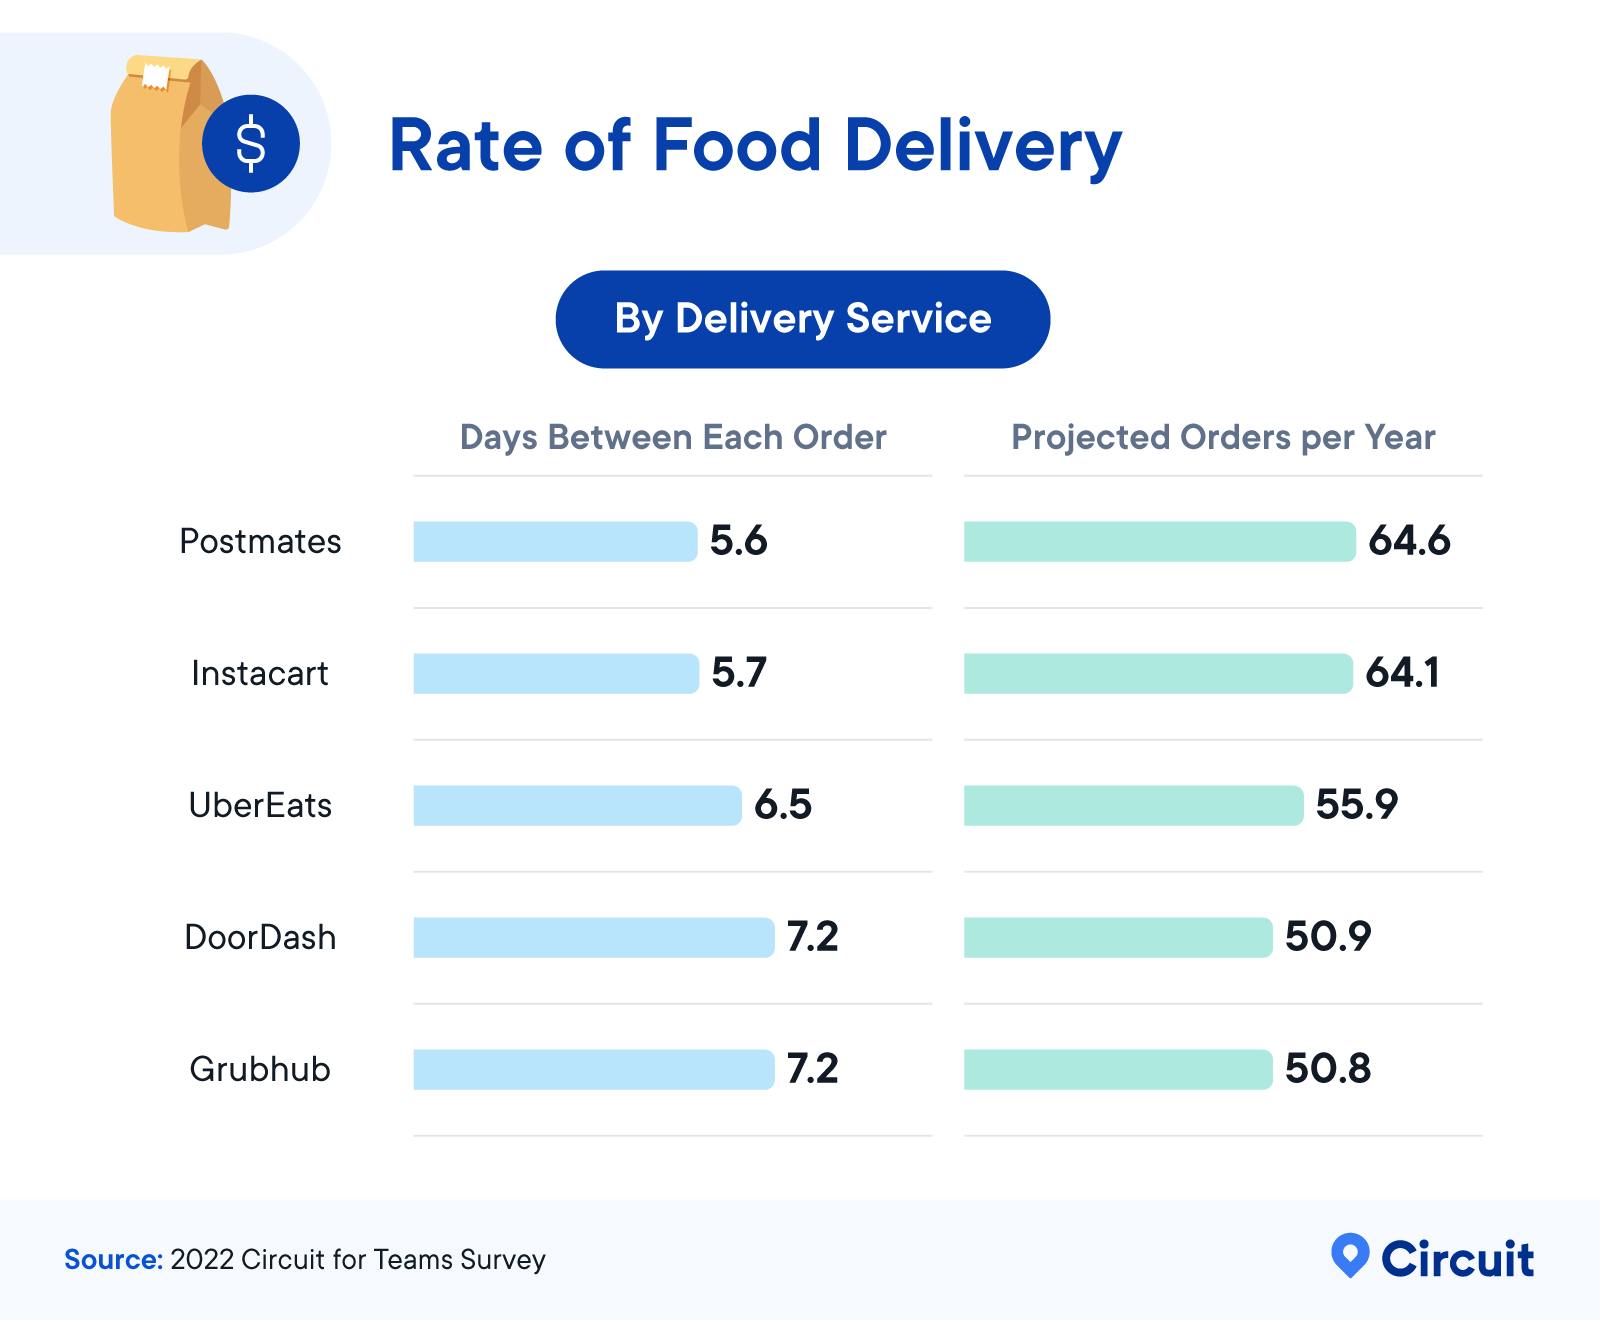 Rate of Food Delivery by Delivery Service